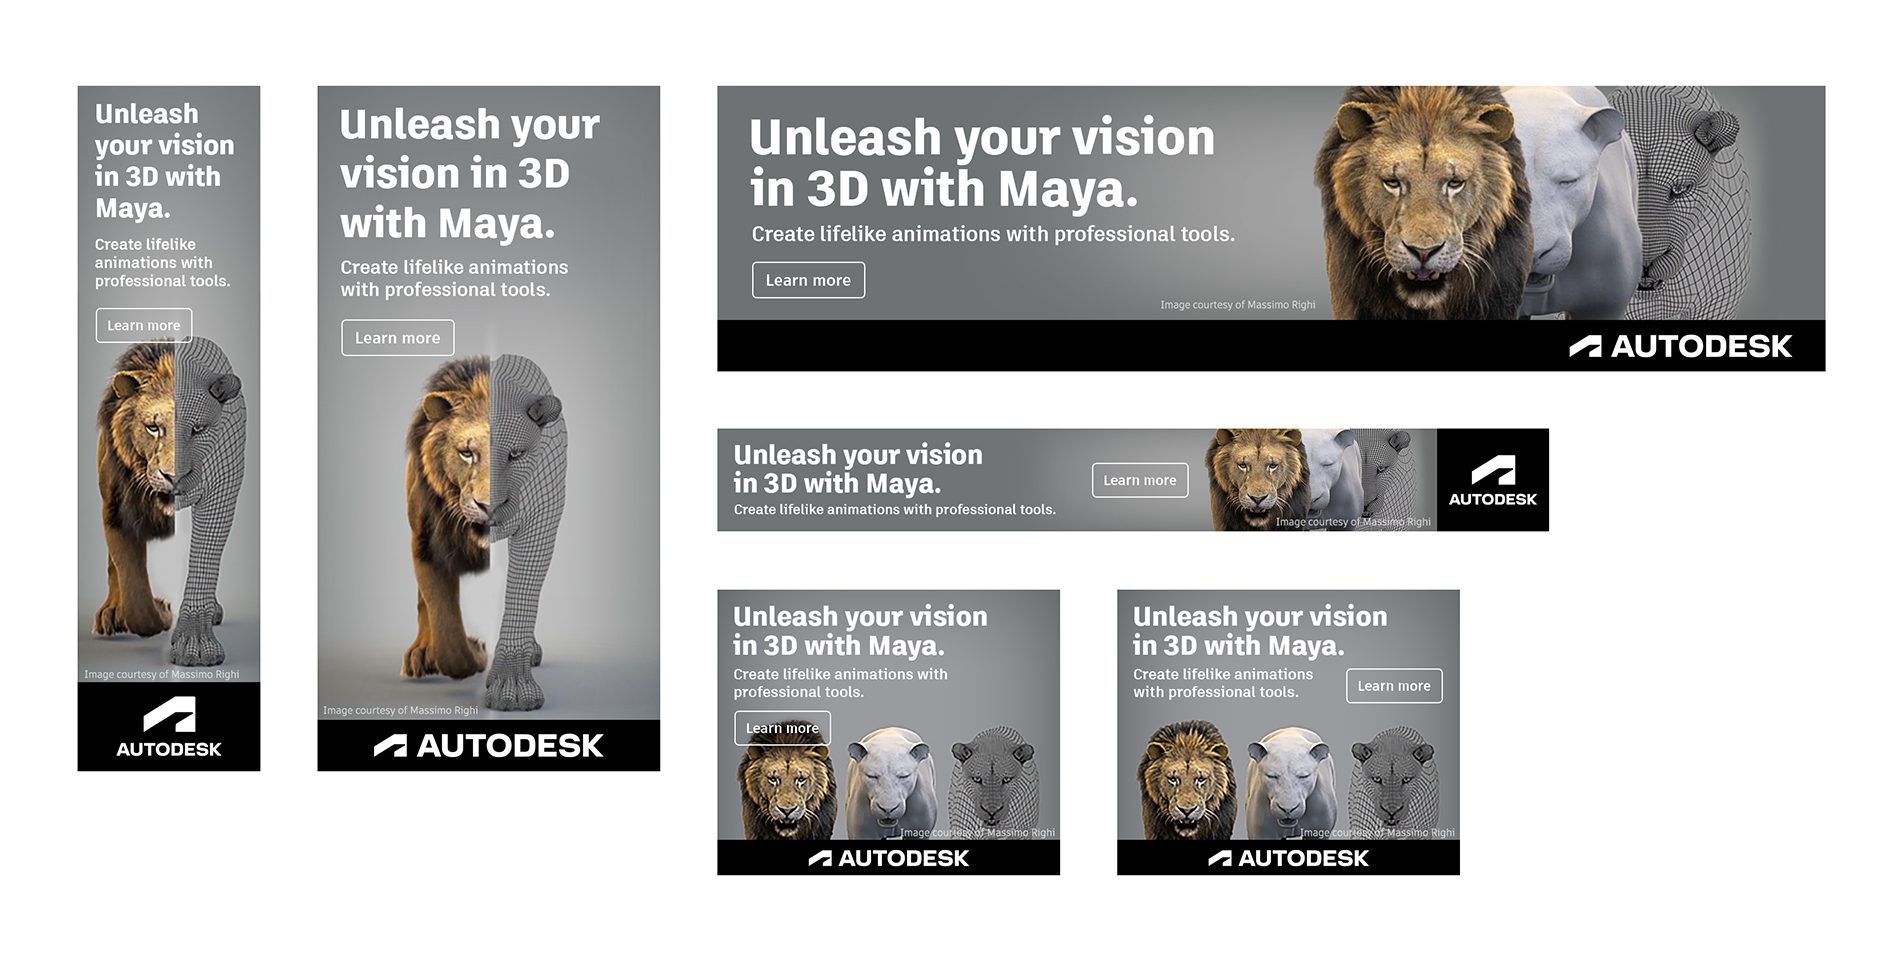 Autodesk branded examples of web banner ads